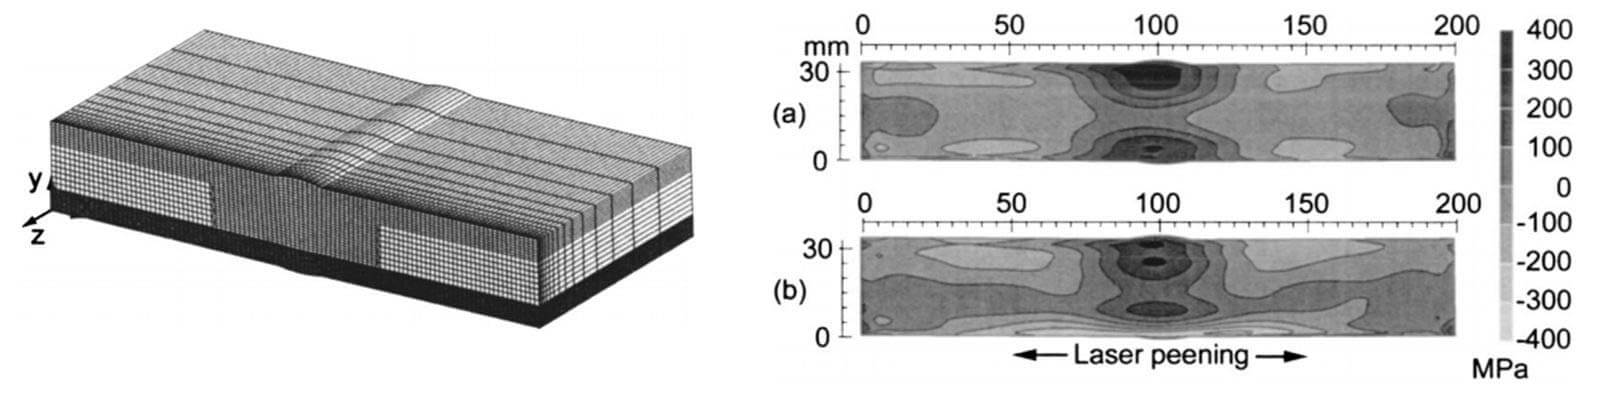 The Finite Element Model (FEM) with equivalent nodes in order to map the measured surface contour and the resulting full field residual stress maps in the as-welded and laser peened specimens